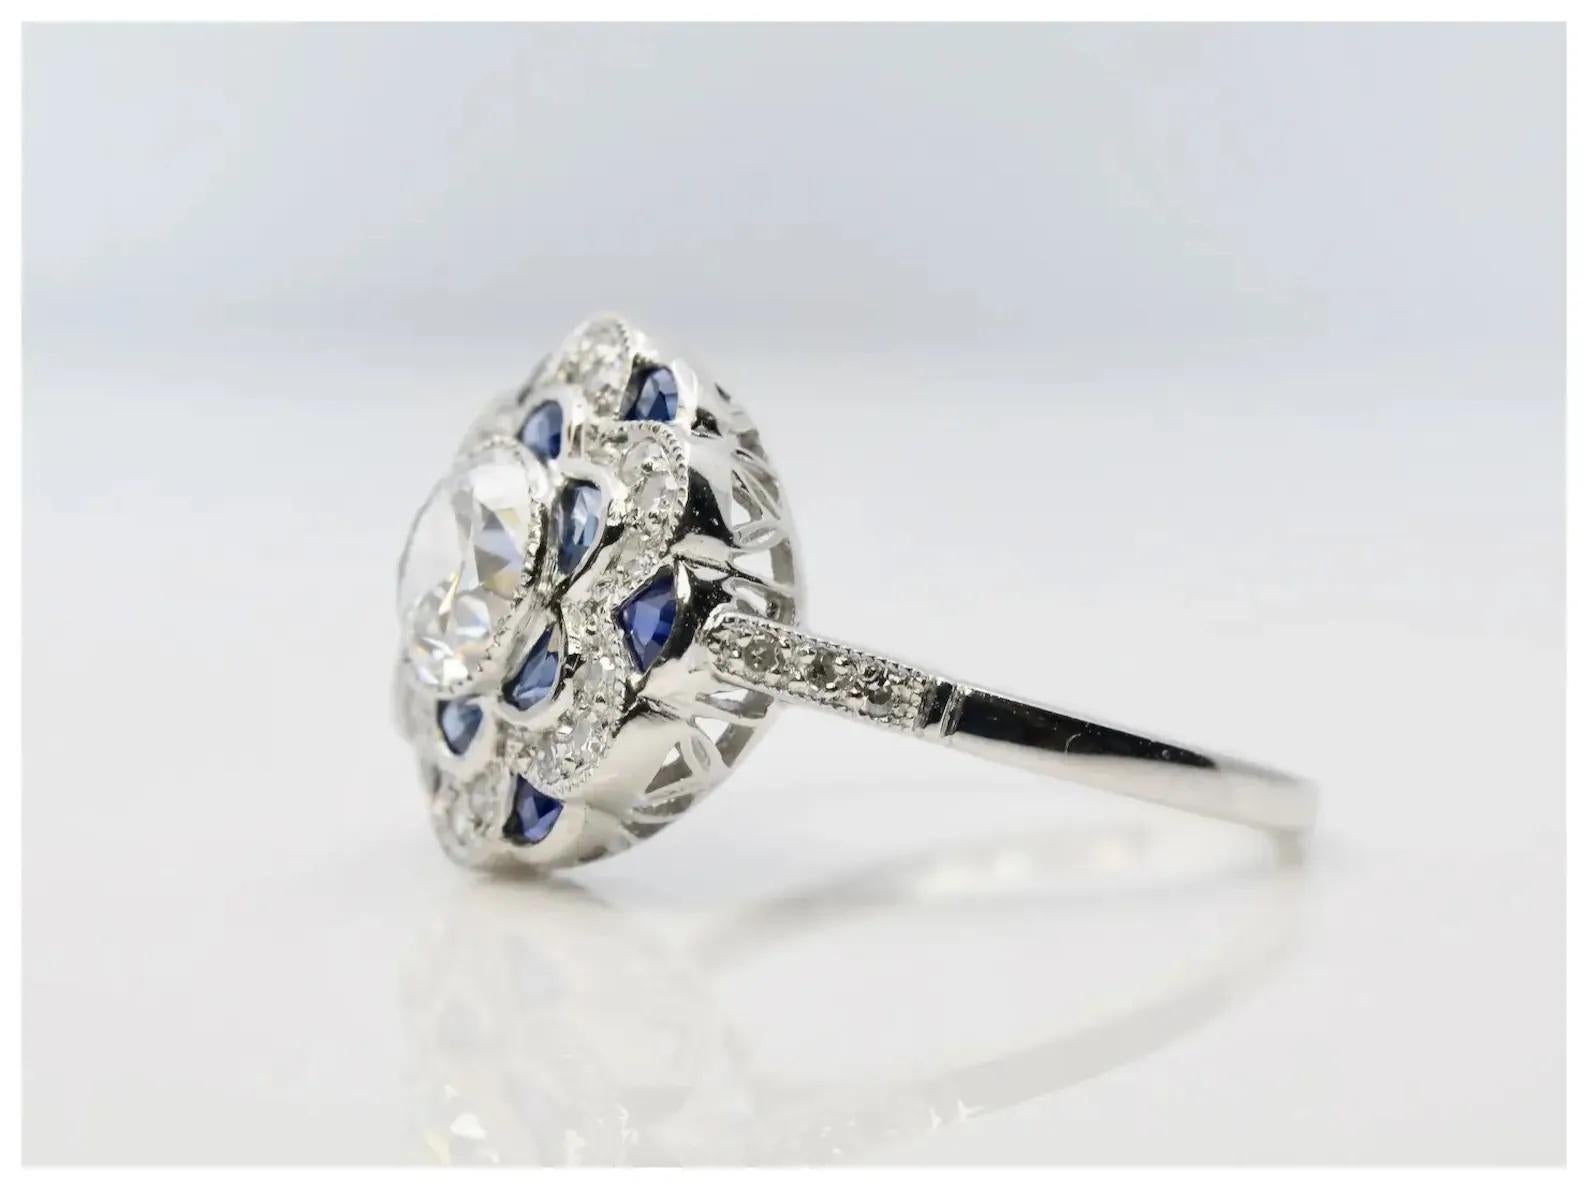 An Art Deco style diamond, and sapphire ring in platinum.

Centered by a 0.81 carat H color, SI1 clarity old European cut diamond set in a milligrained platinum bezel.

Framing the center diamond are 12 bespoke French cut sapphire petals, and 24